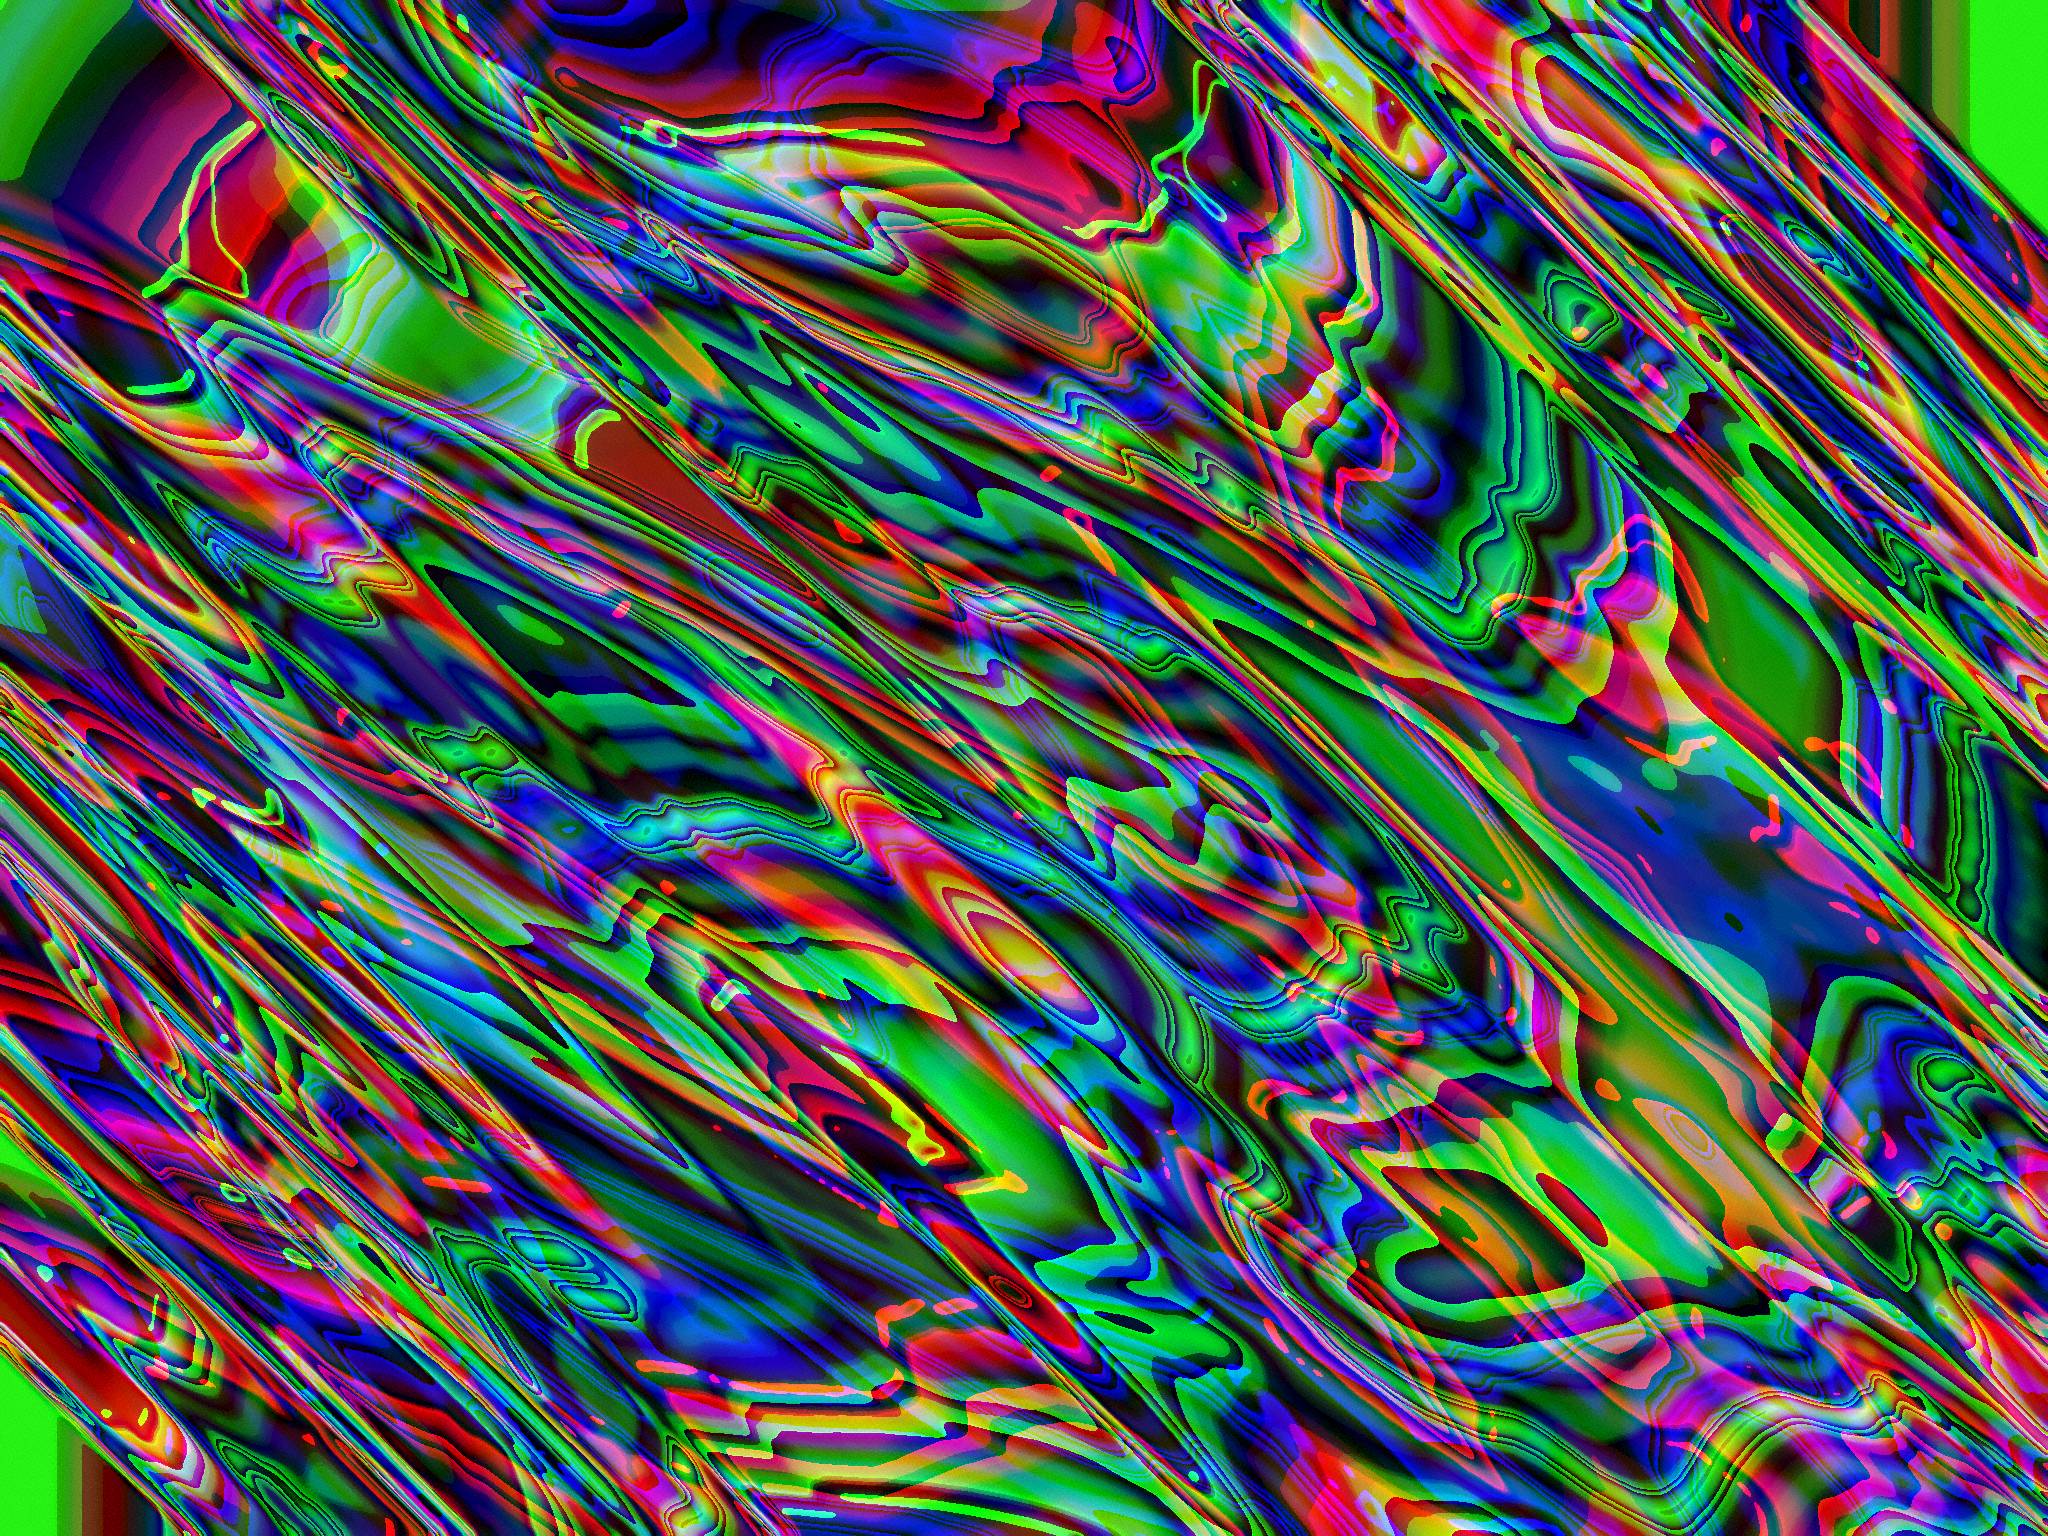 Trippy Background Images - Wallpaper Cave